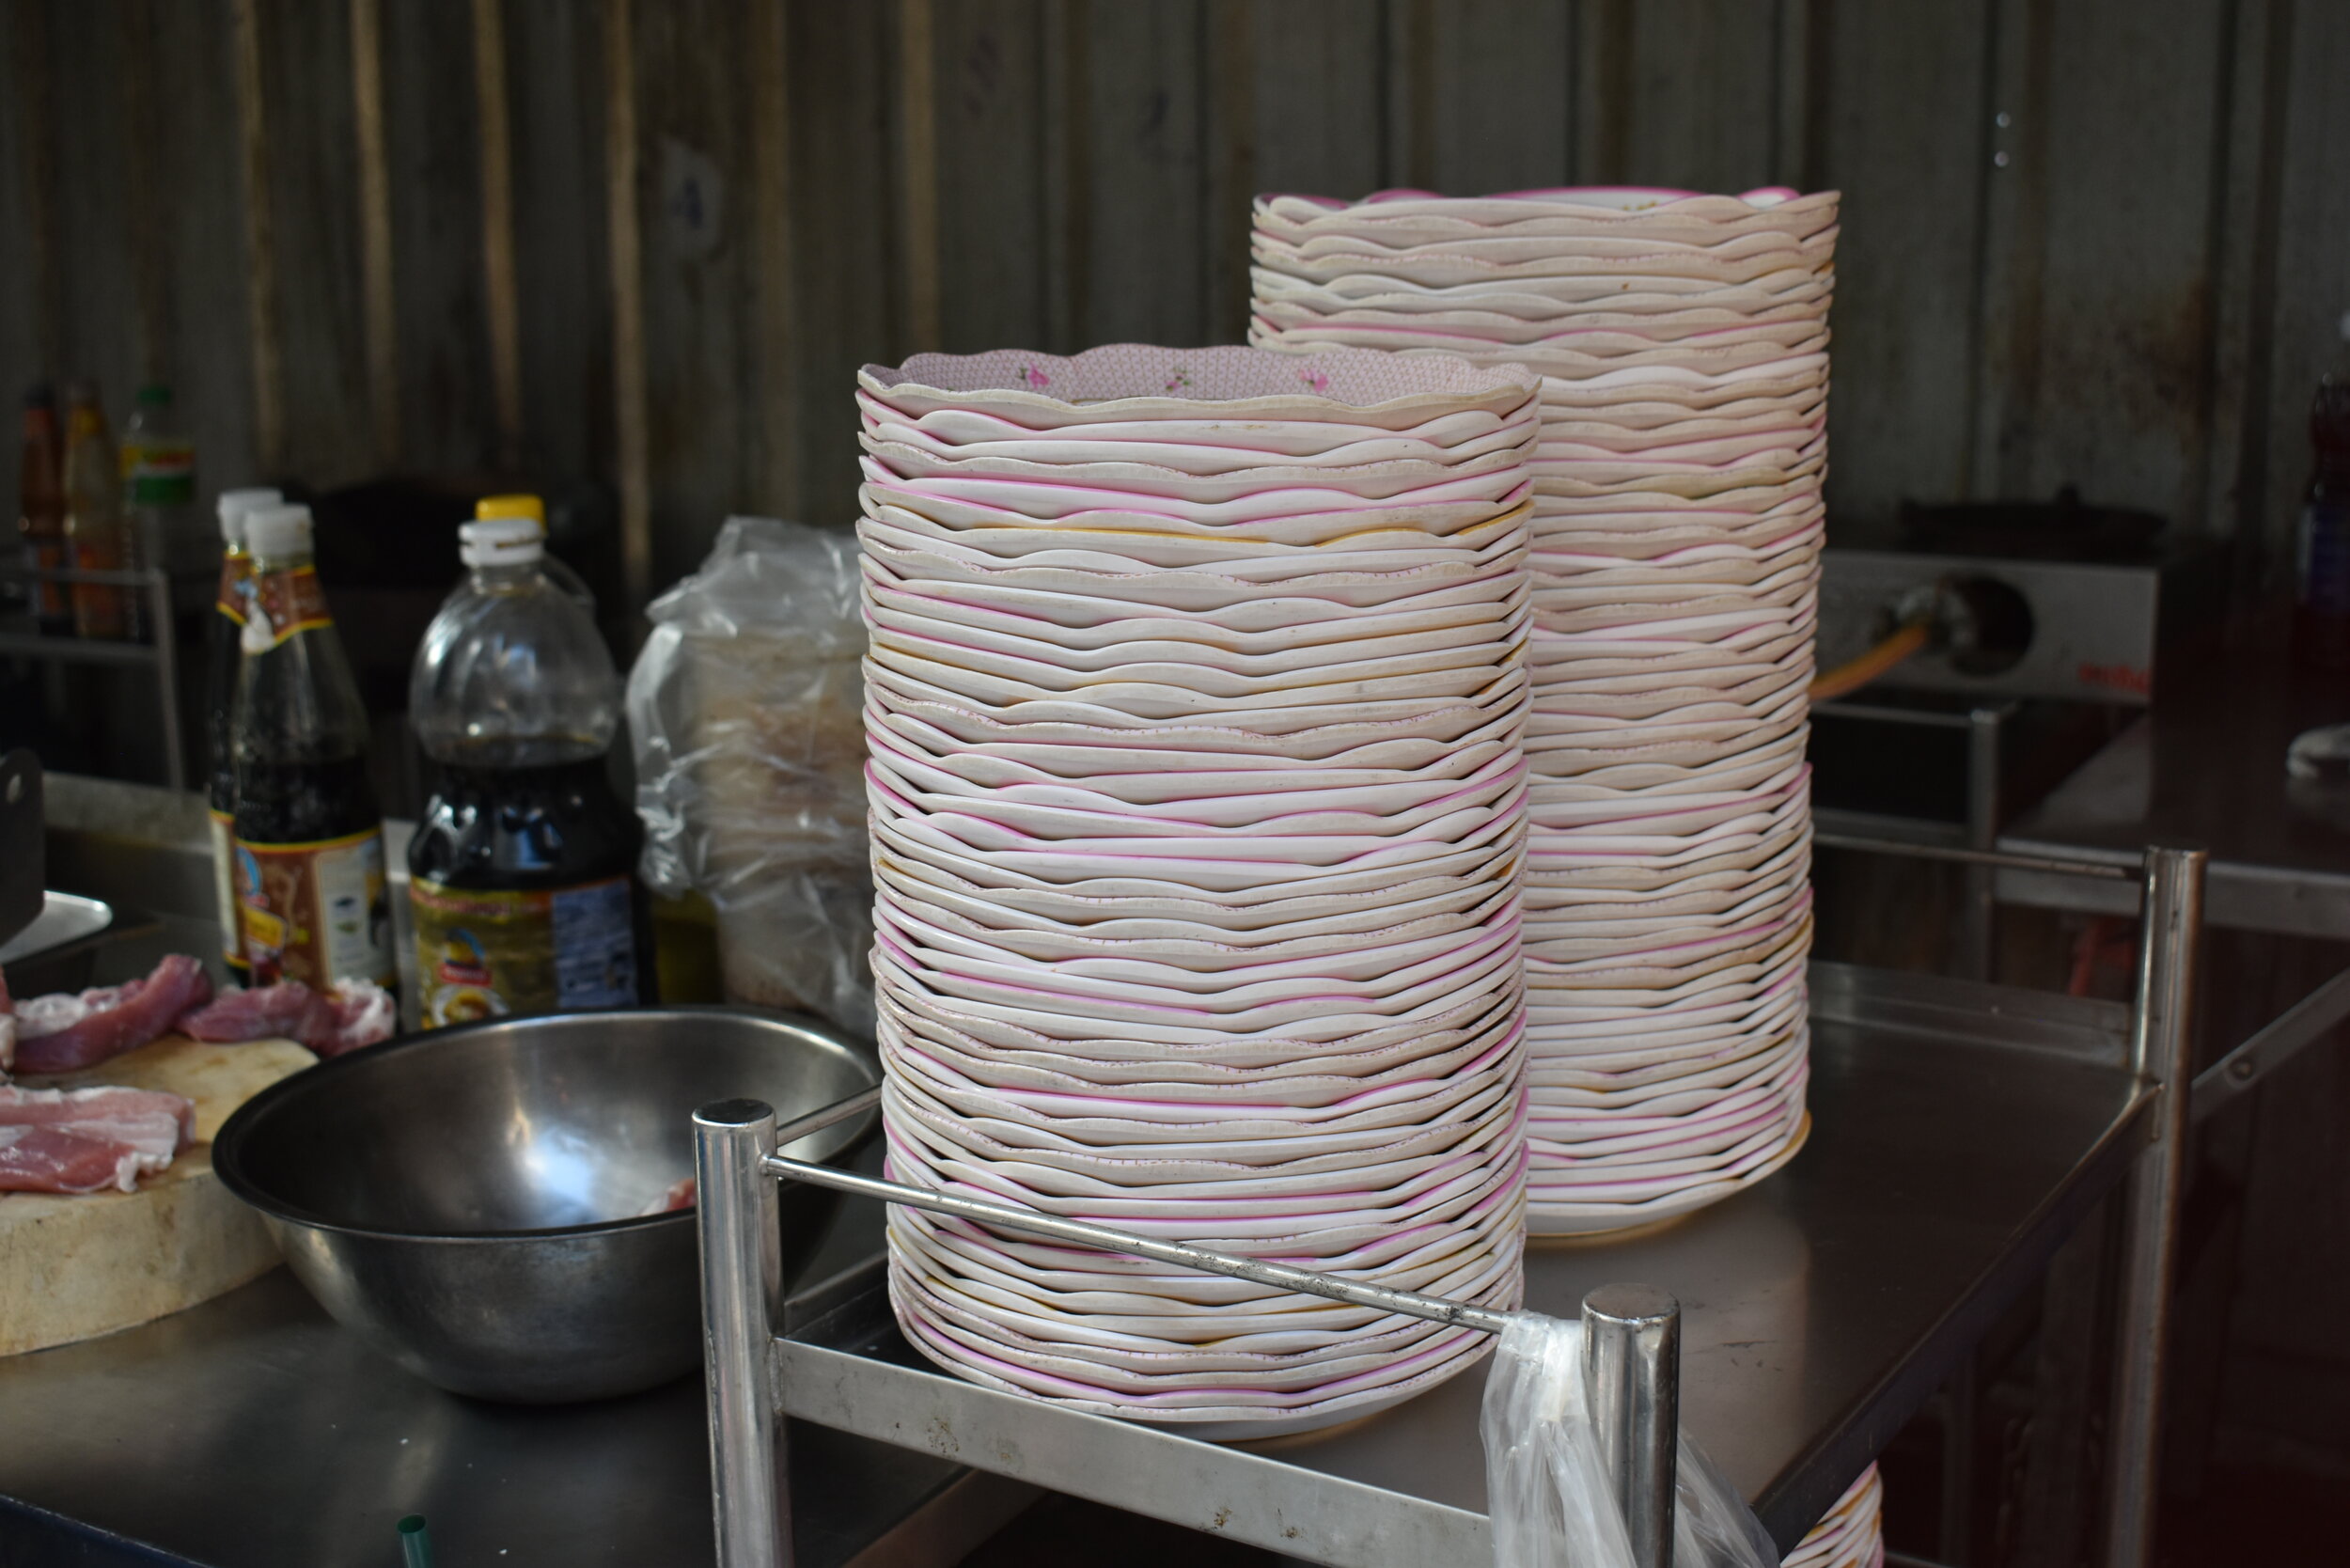 Stacks of food containers14.JPG